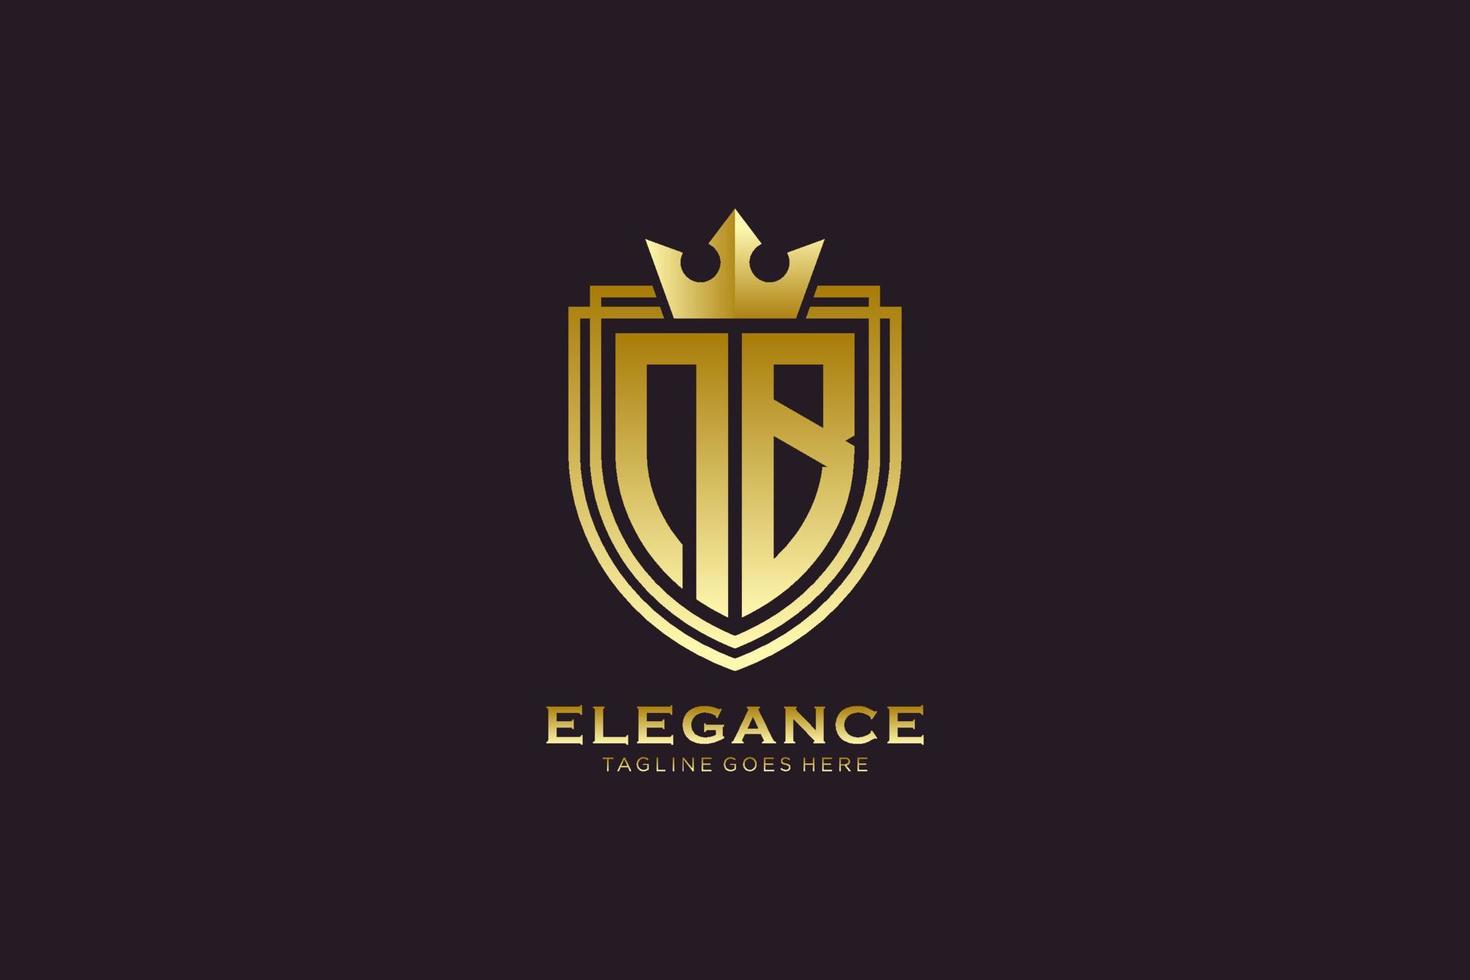 initial NB elegant luxury monogram logo or badge template with scrolls and royal crown - perfect for luxurious branding projects vector